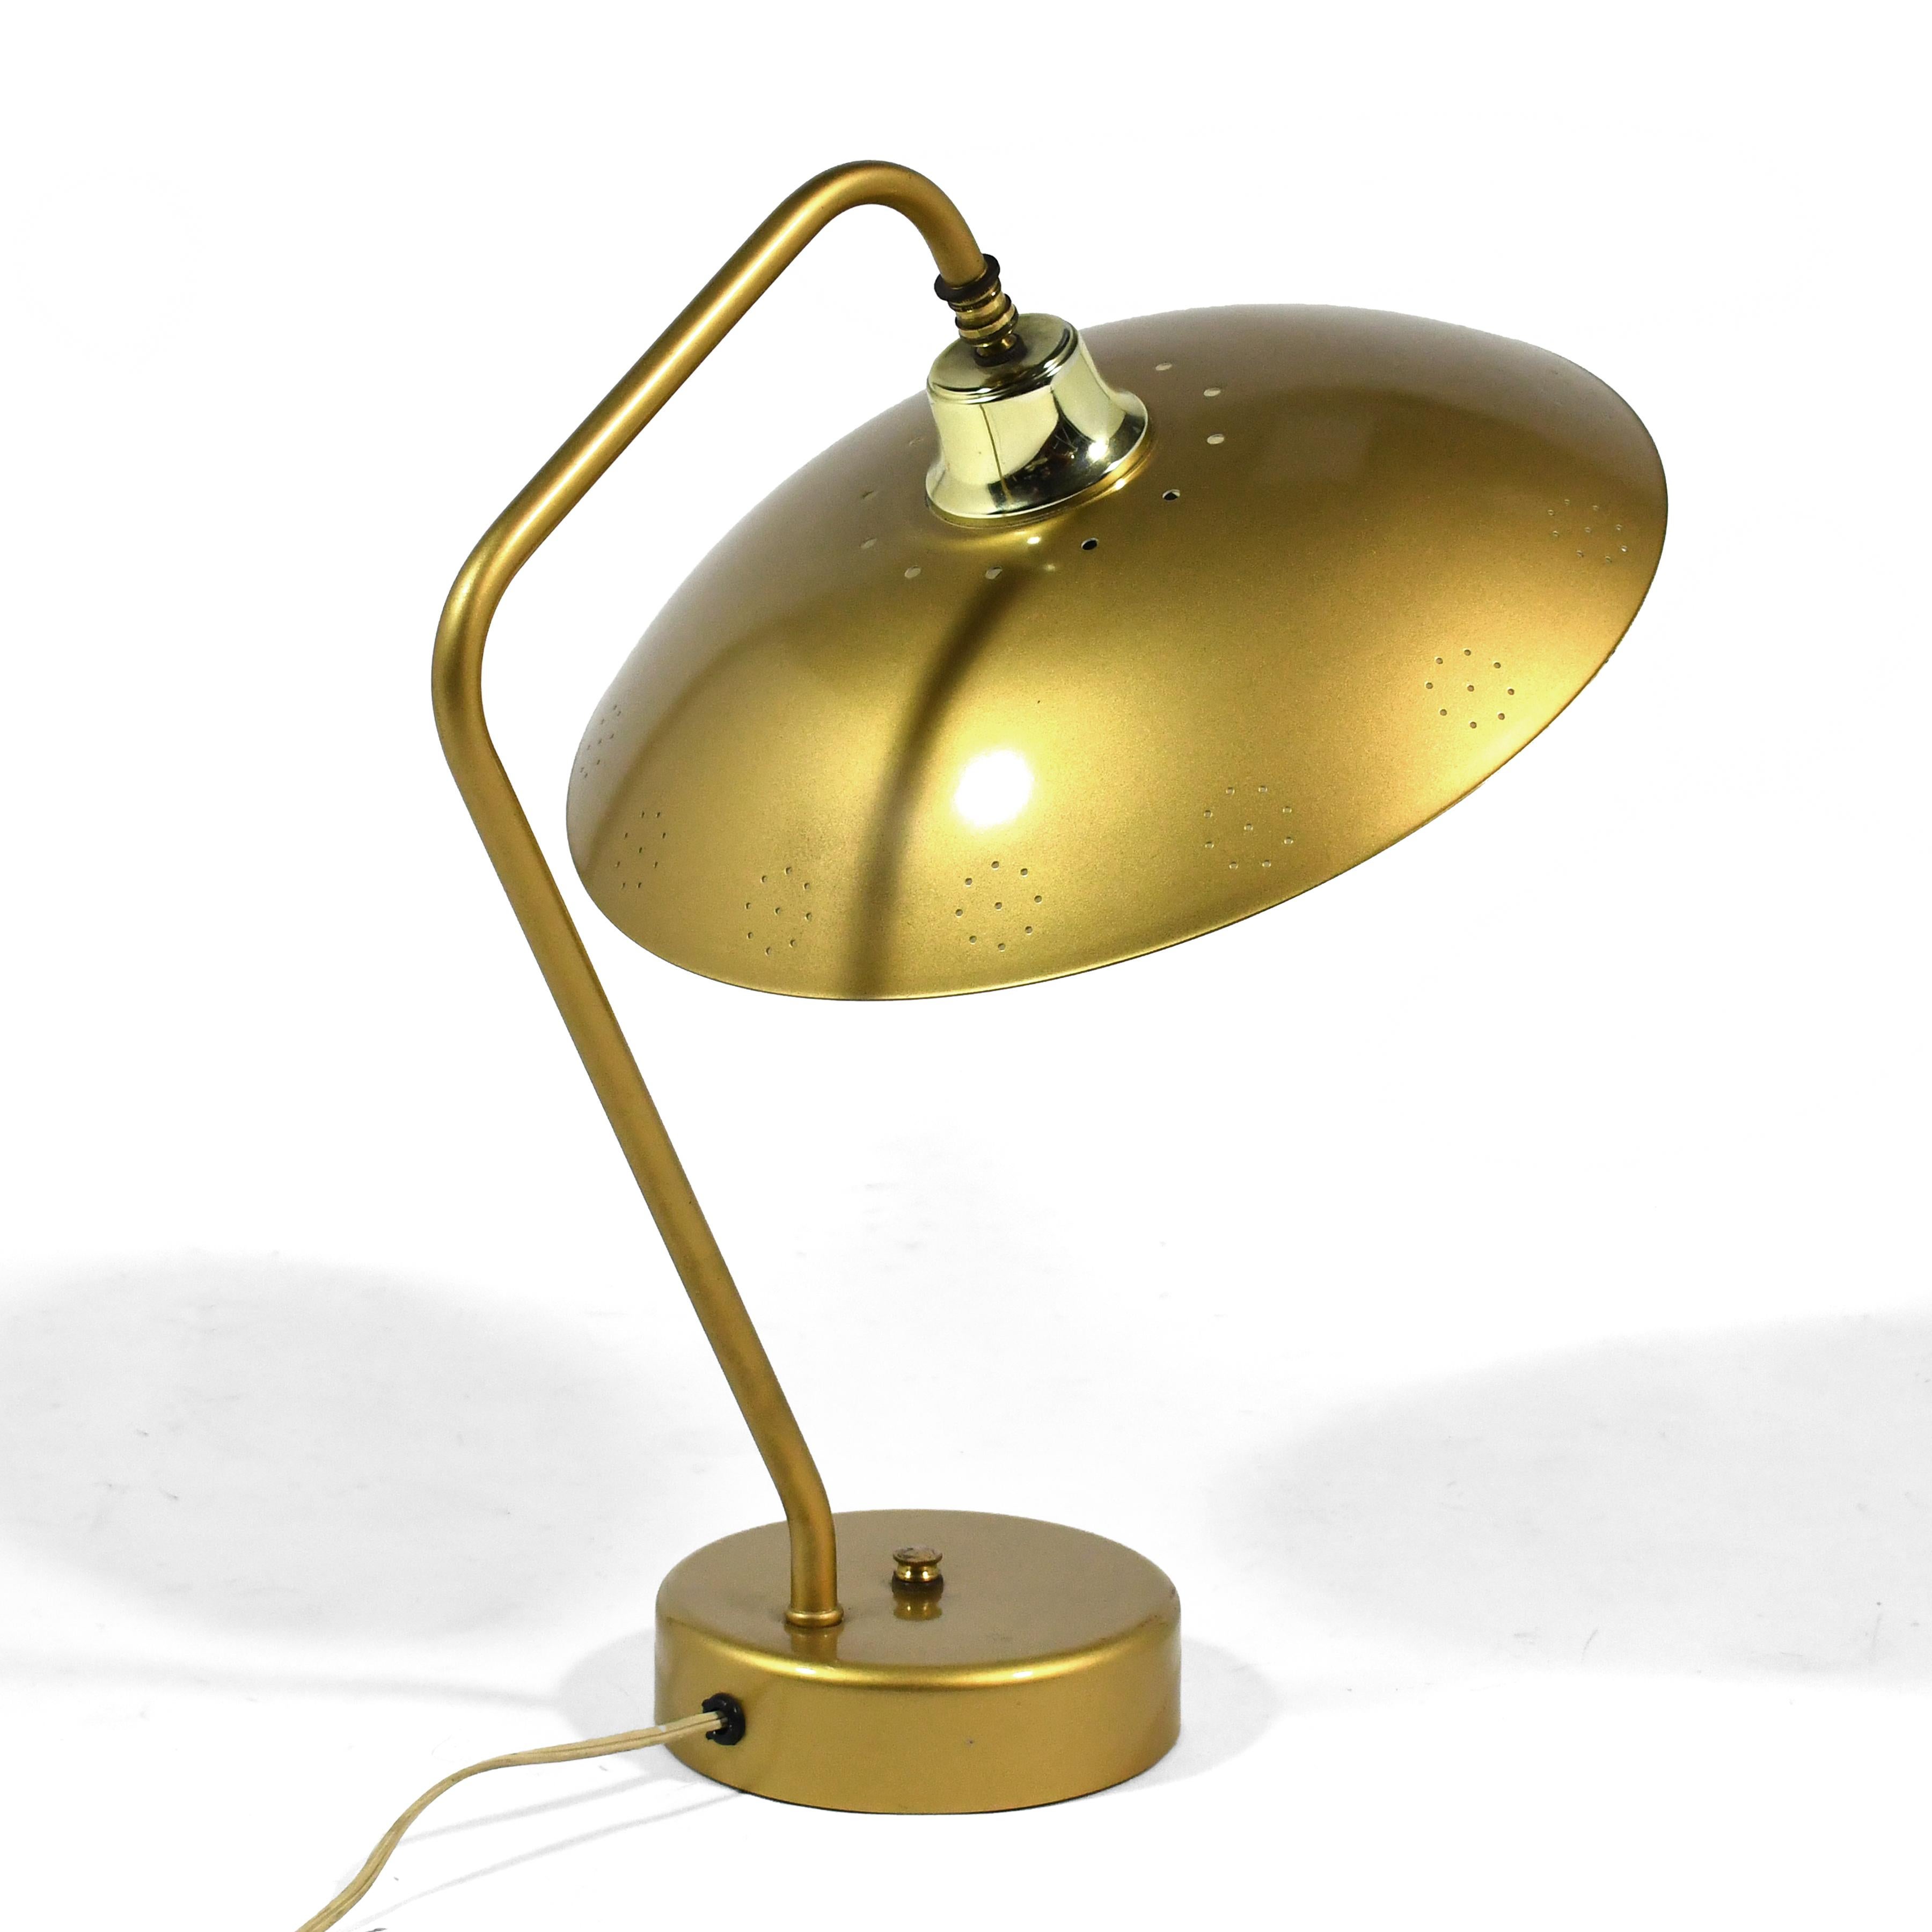 This lovely 1950s desk lamp is so shockingly clean, we don't think it has ever been used. The design is obviously inspired by lamps designed by Greta Grossman, Kurt Versen and Gerald Thurston, but we do not know the maker. The plastic diffuser is